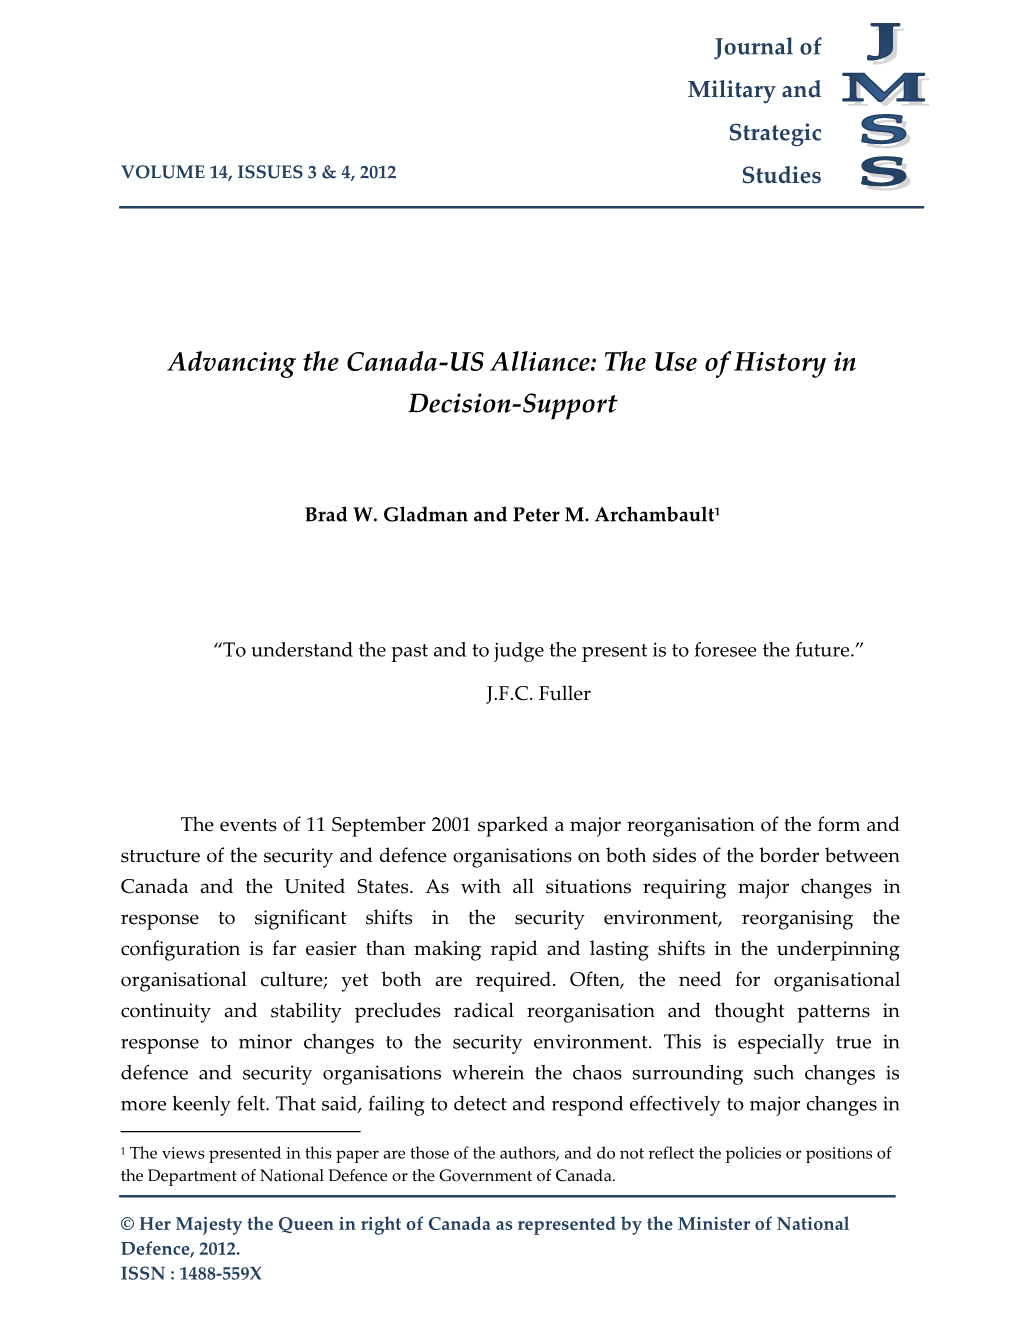 Advancing the Canada-US Alliance: the Use of History in Decision-Support